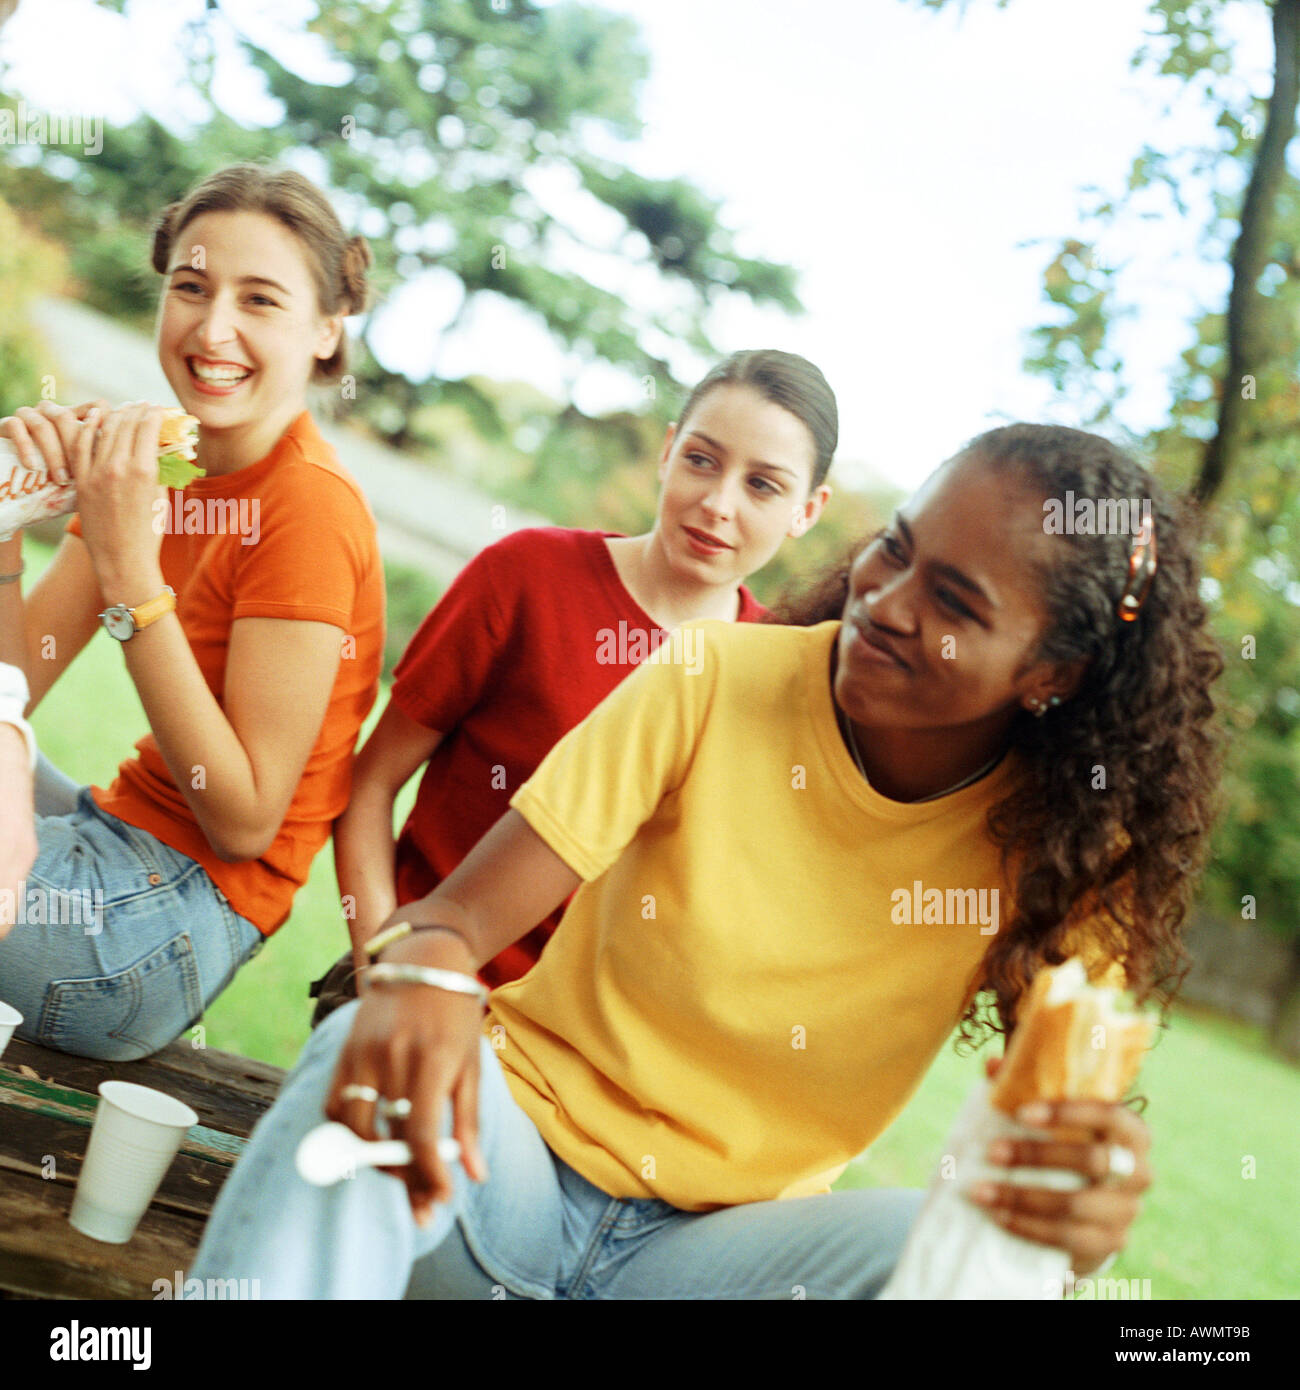 Young women eating sandwiches together outside Stock Photo